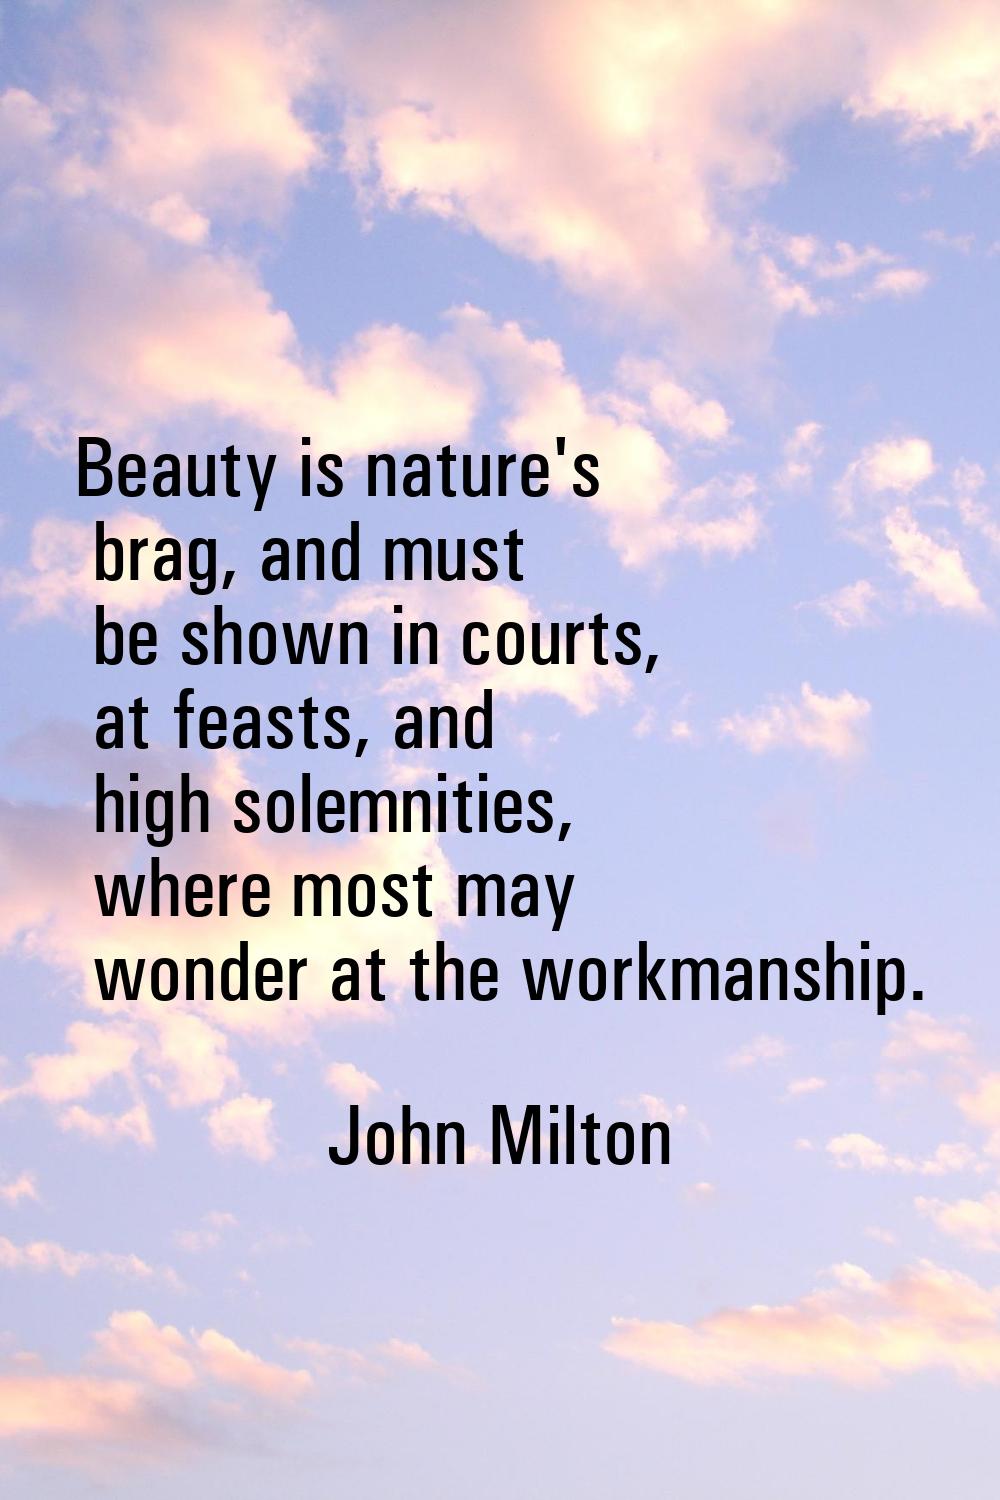 Beauty is nature's brag, and must be shown in courts, at feasts, and high solemnities, where most m